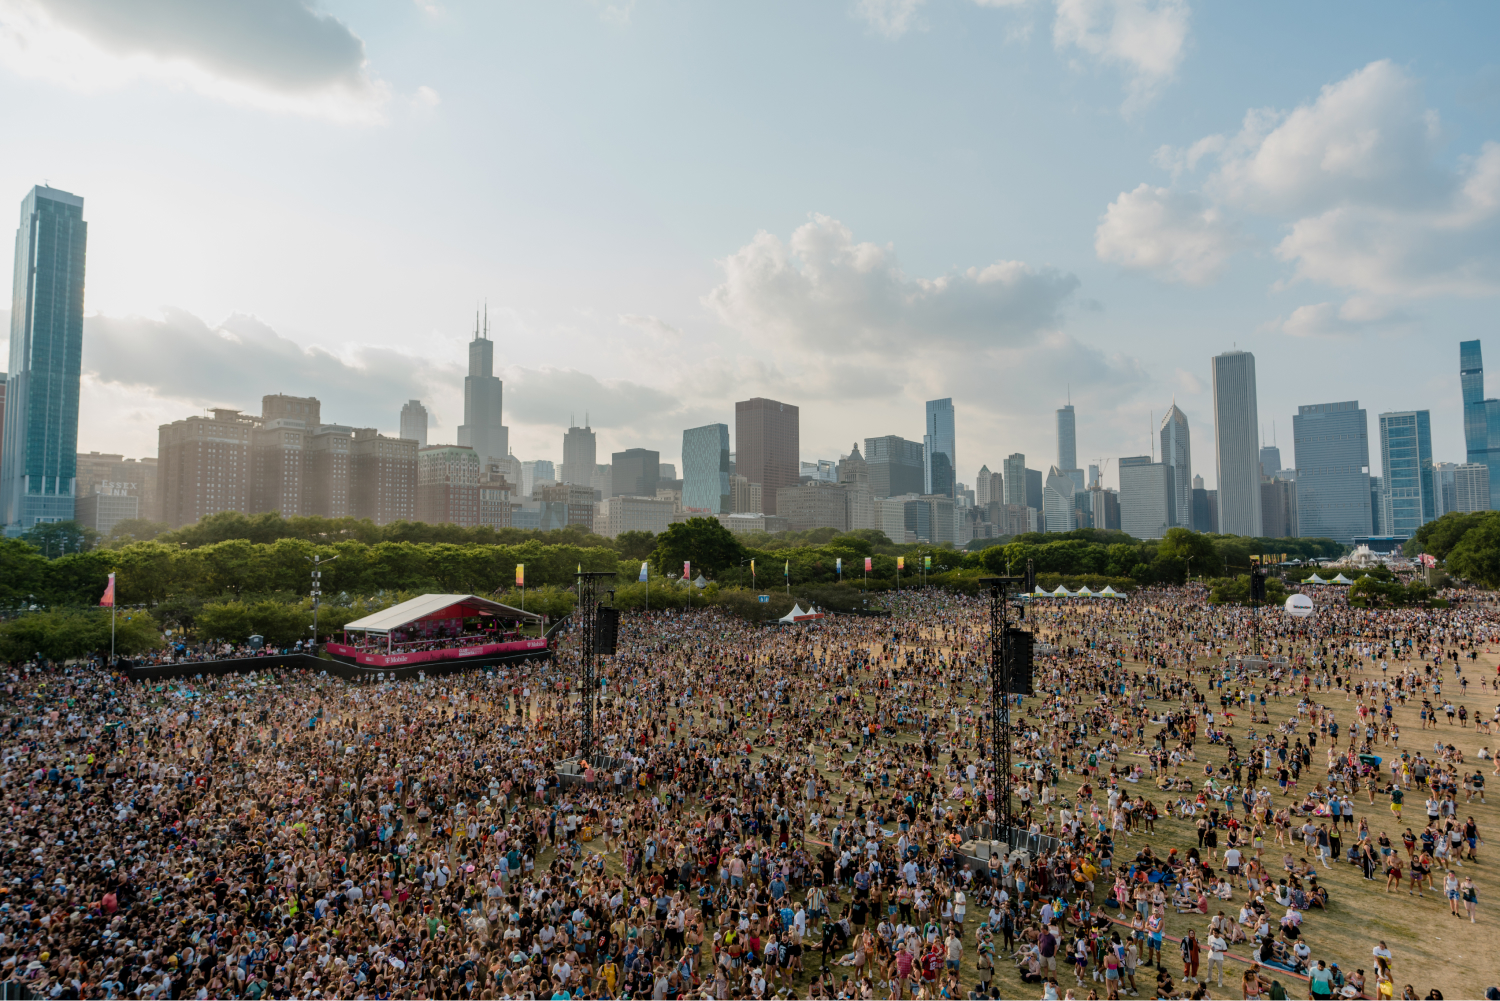 Sueños Music Festival Grant Park, Chicago May 28th & 29th